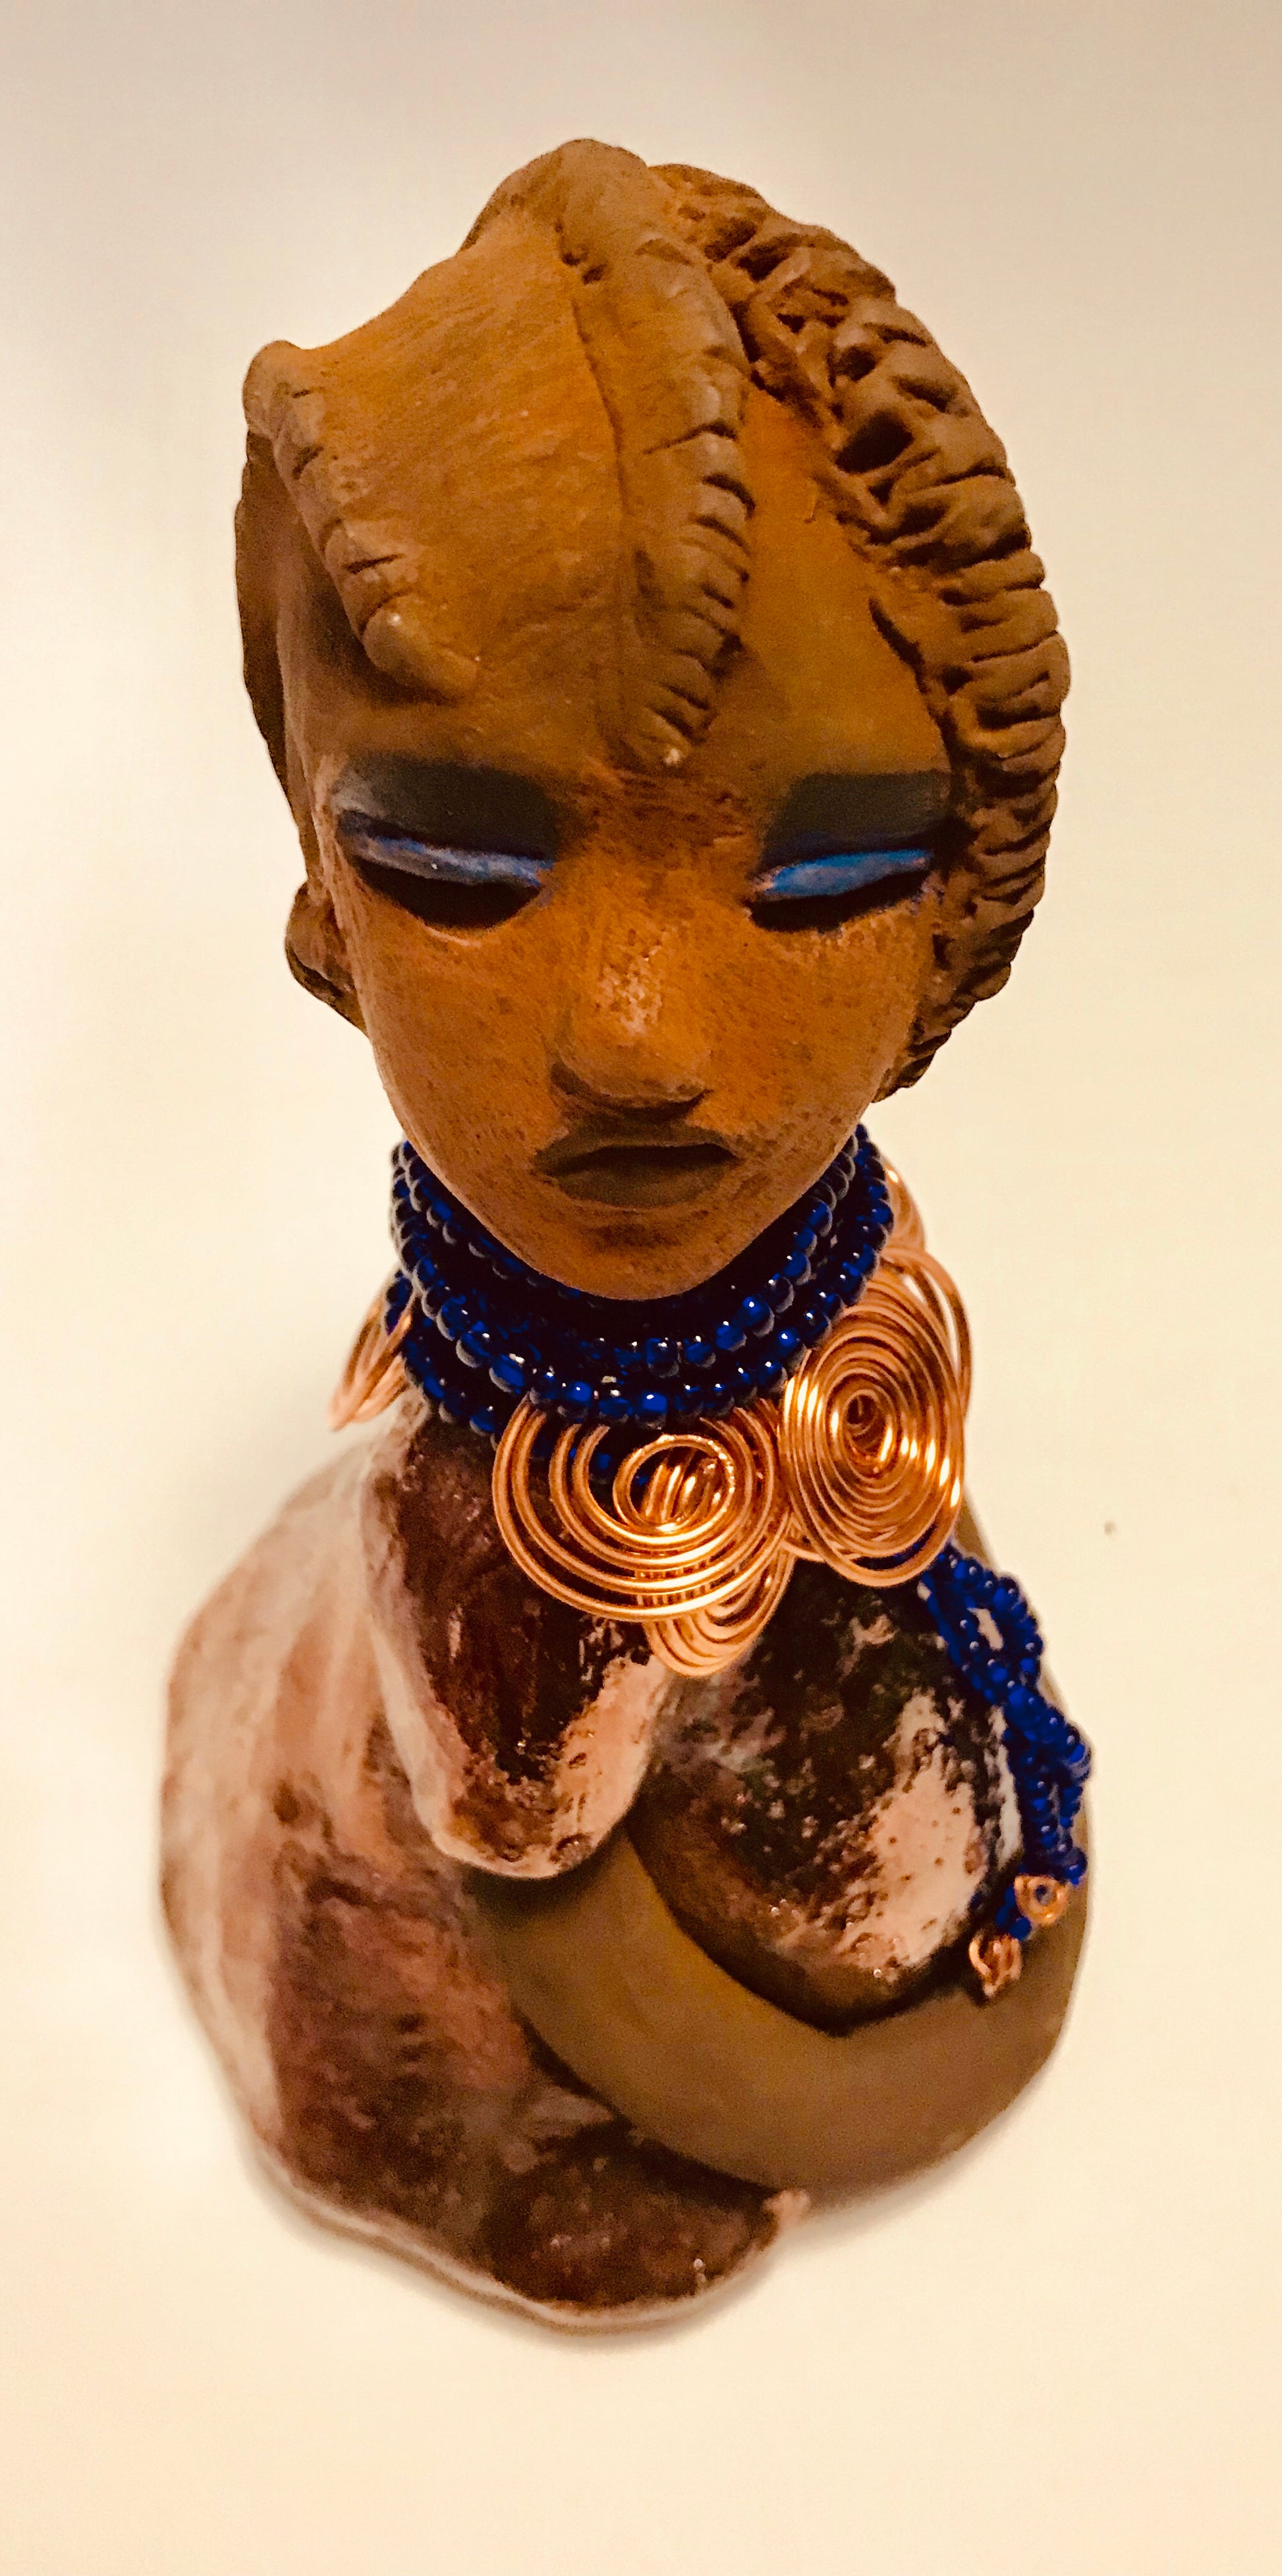 Ife stands 7.5" x 4" x 5" and weighs 1.02  lbs. She has a lovely honey brown complexion with reddish brown lips. She has a short braided hairstyle.      Ife has a colorful metallic antique copper glazed dress.     She wears spiral copper wire necklaces on top of an aqua blue beaded collar.     Ife long loving arms rest at her side.     With accent blue eye shadow and eyes wide opened, Ife has hopes of finding a new home. 